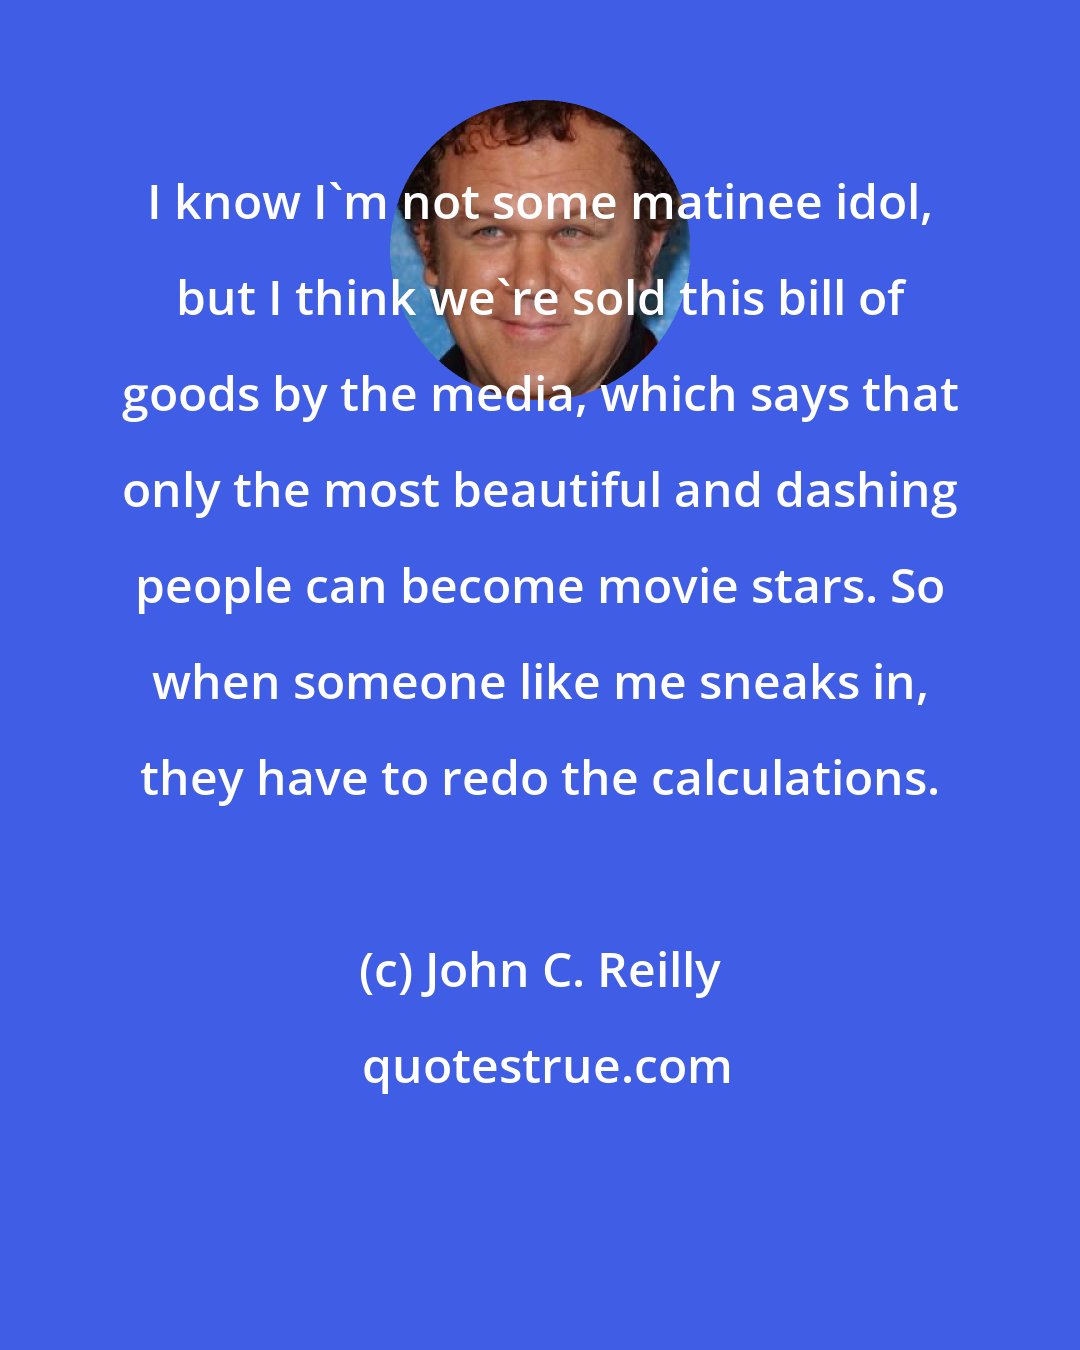 John C. Reilly: I know I'm not some matinee idol, but I think we're sold this bill of goods by the media, which says that only the most beautiful and dashing people can become movie stars. So when someone like me sneaks in, they have to redo the calculations.